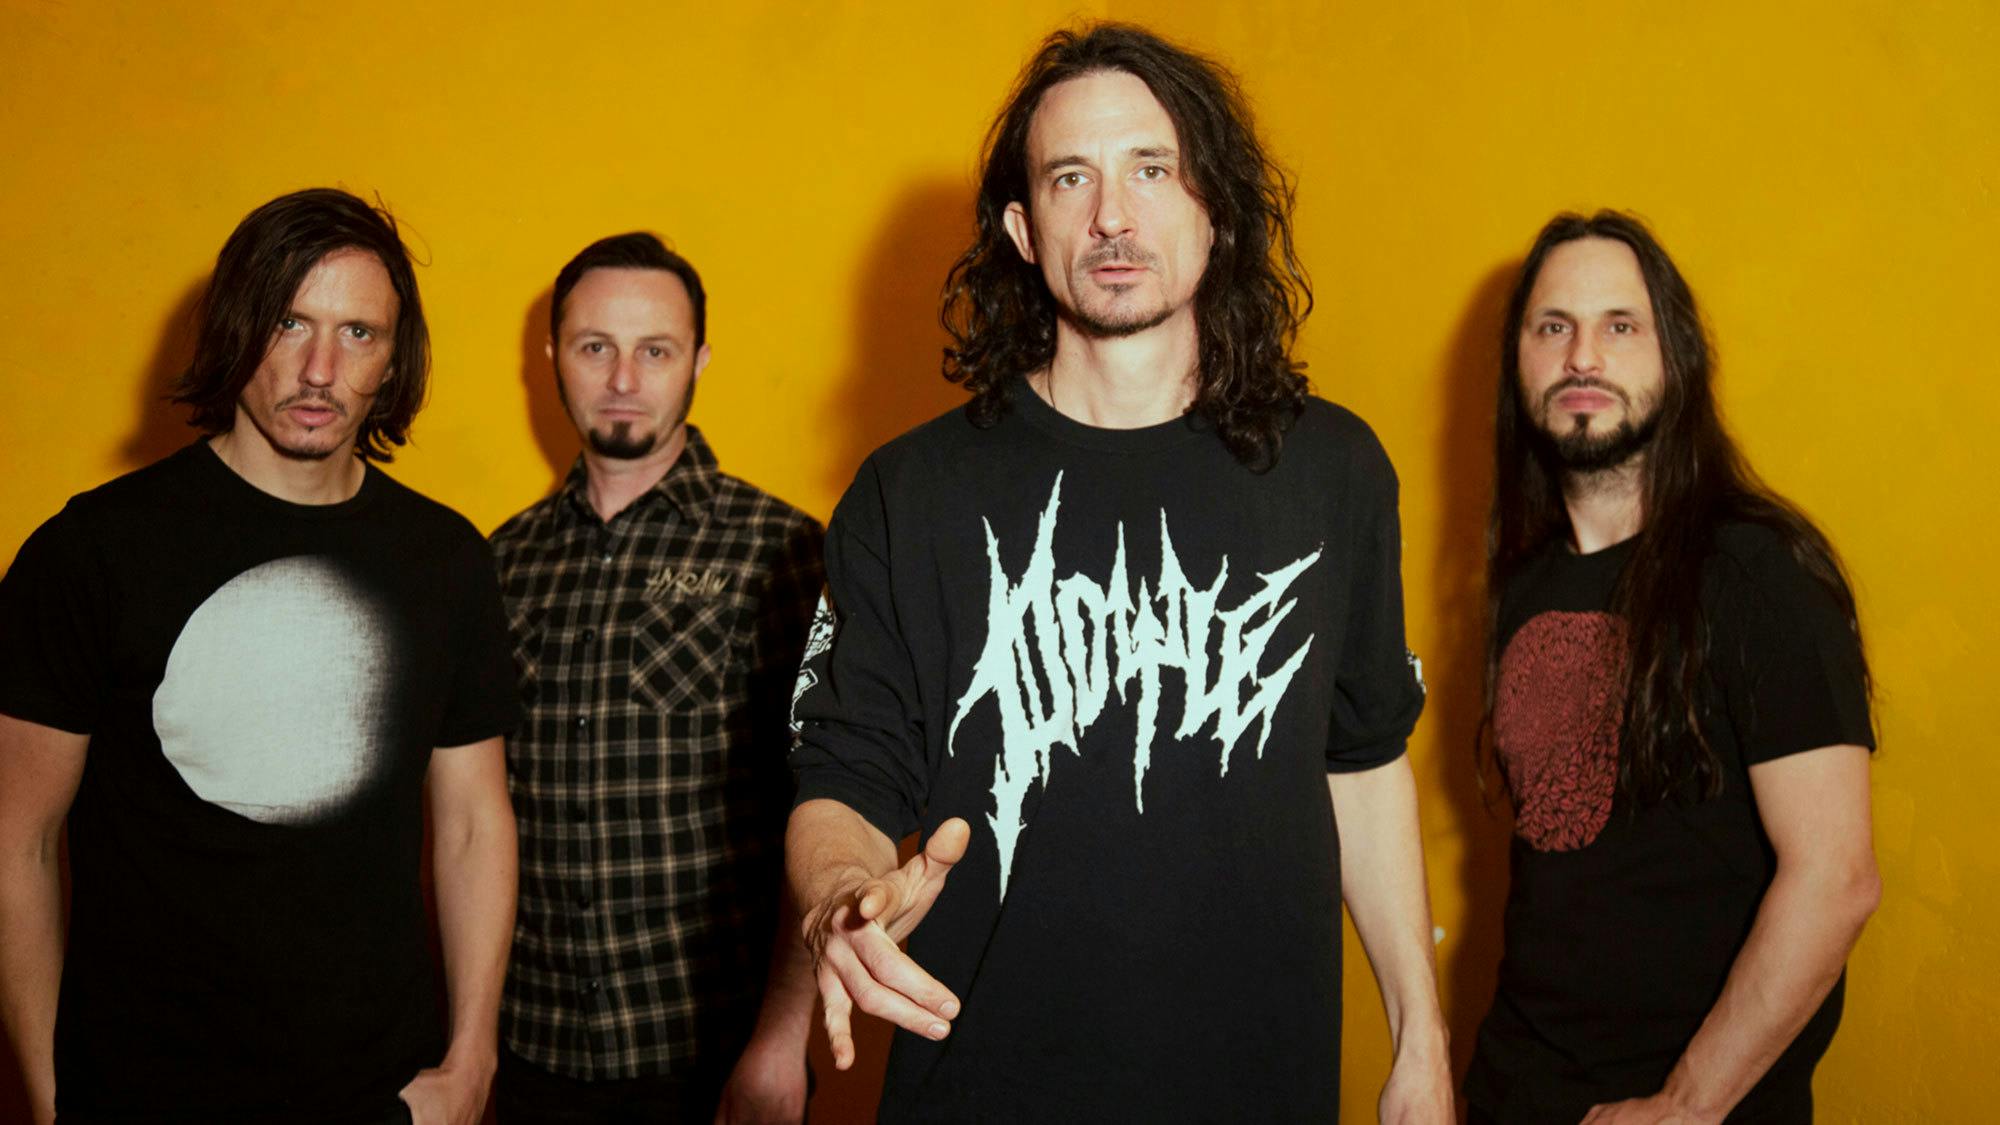 The People Vs. Joe Duplantier: The Gojira frontman on whales, activism and Evil Mario